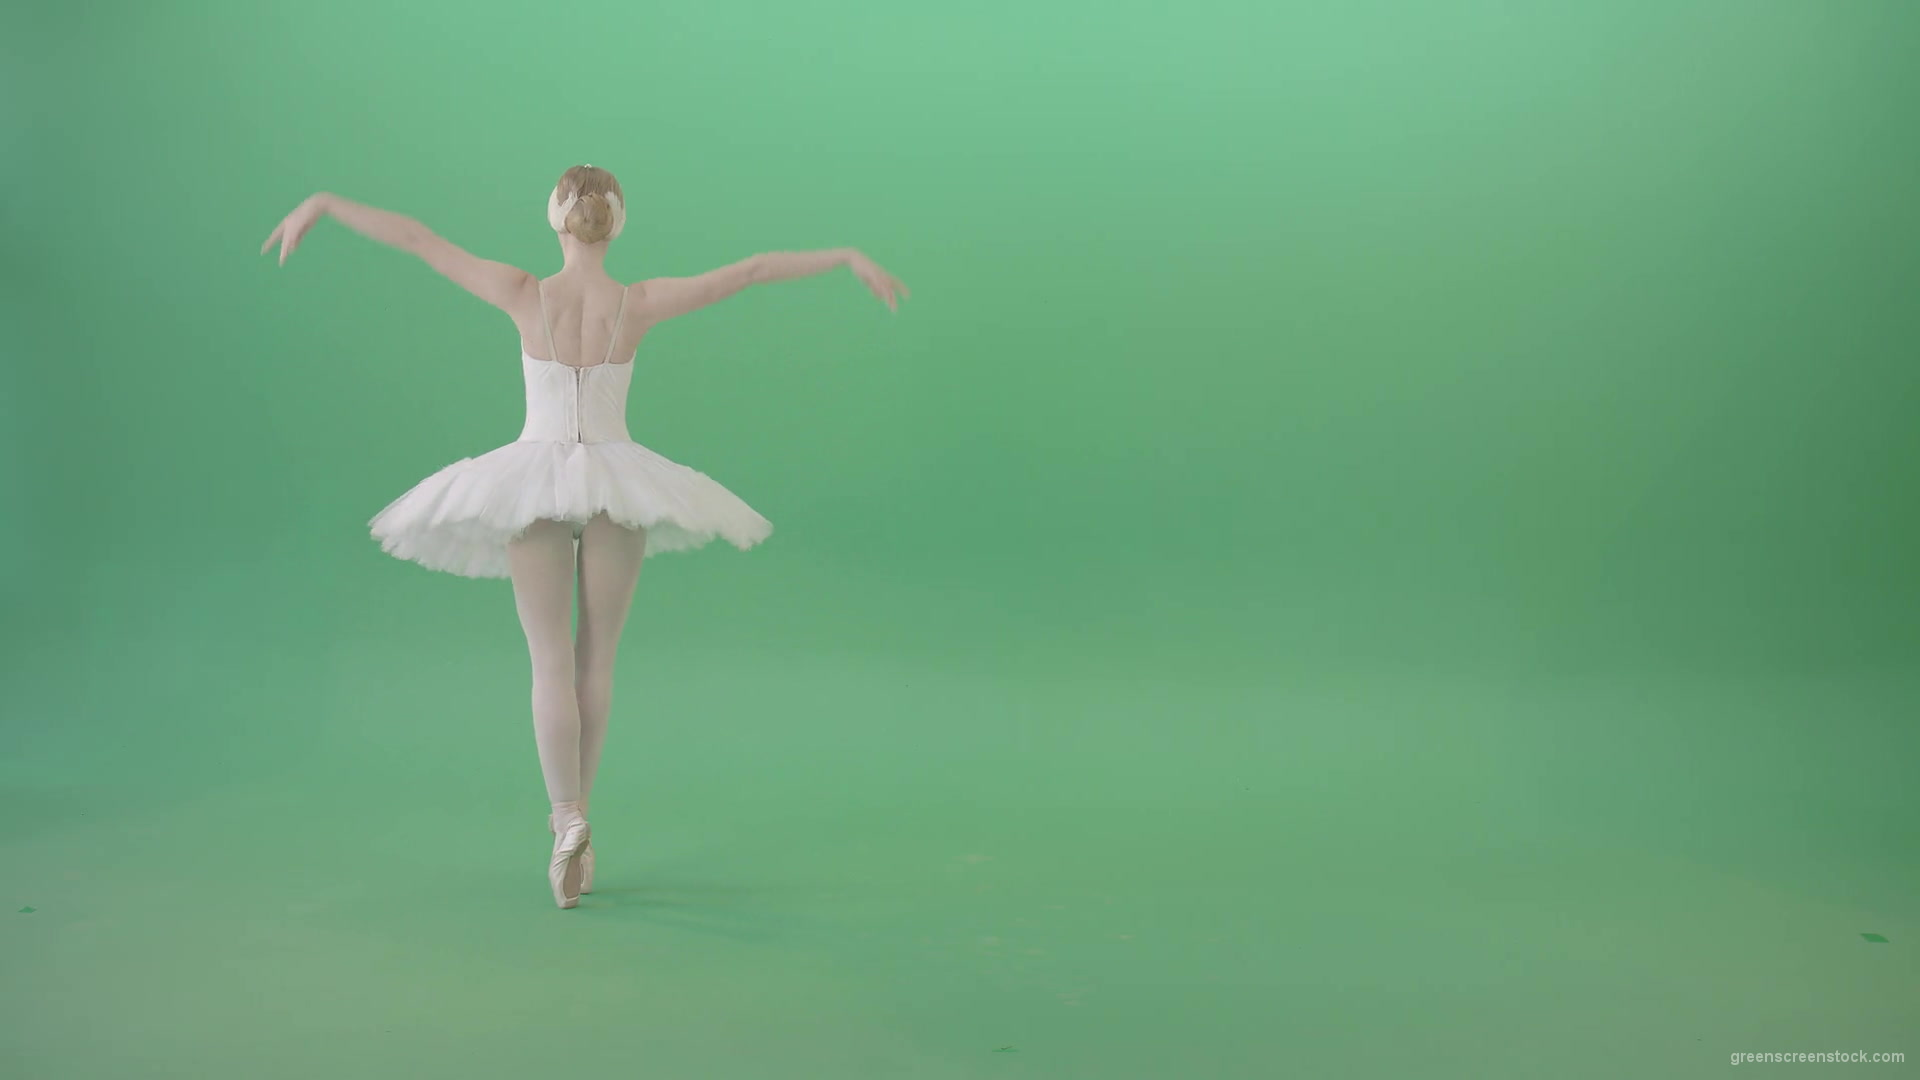 Back-side-view-ballet-dancing-tiny-girl-performs-in-green-screen-studio-4K-Video-Footage-1920_002 Green Screen Stock